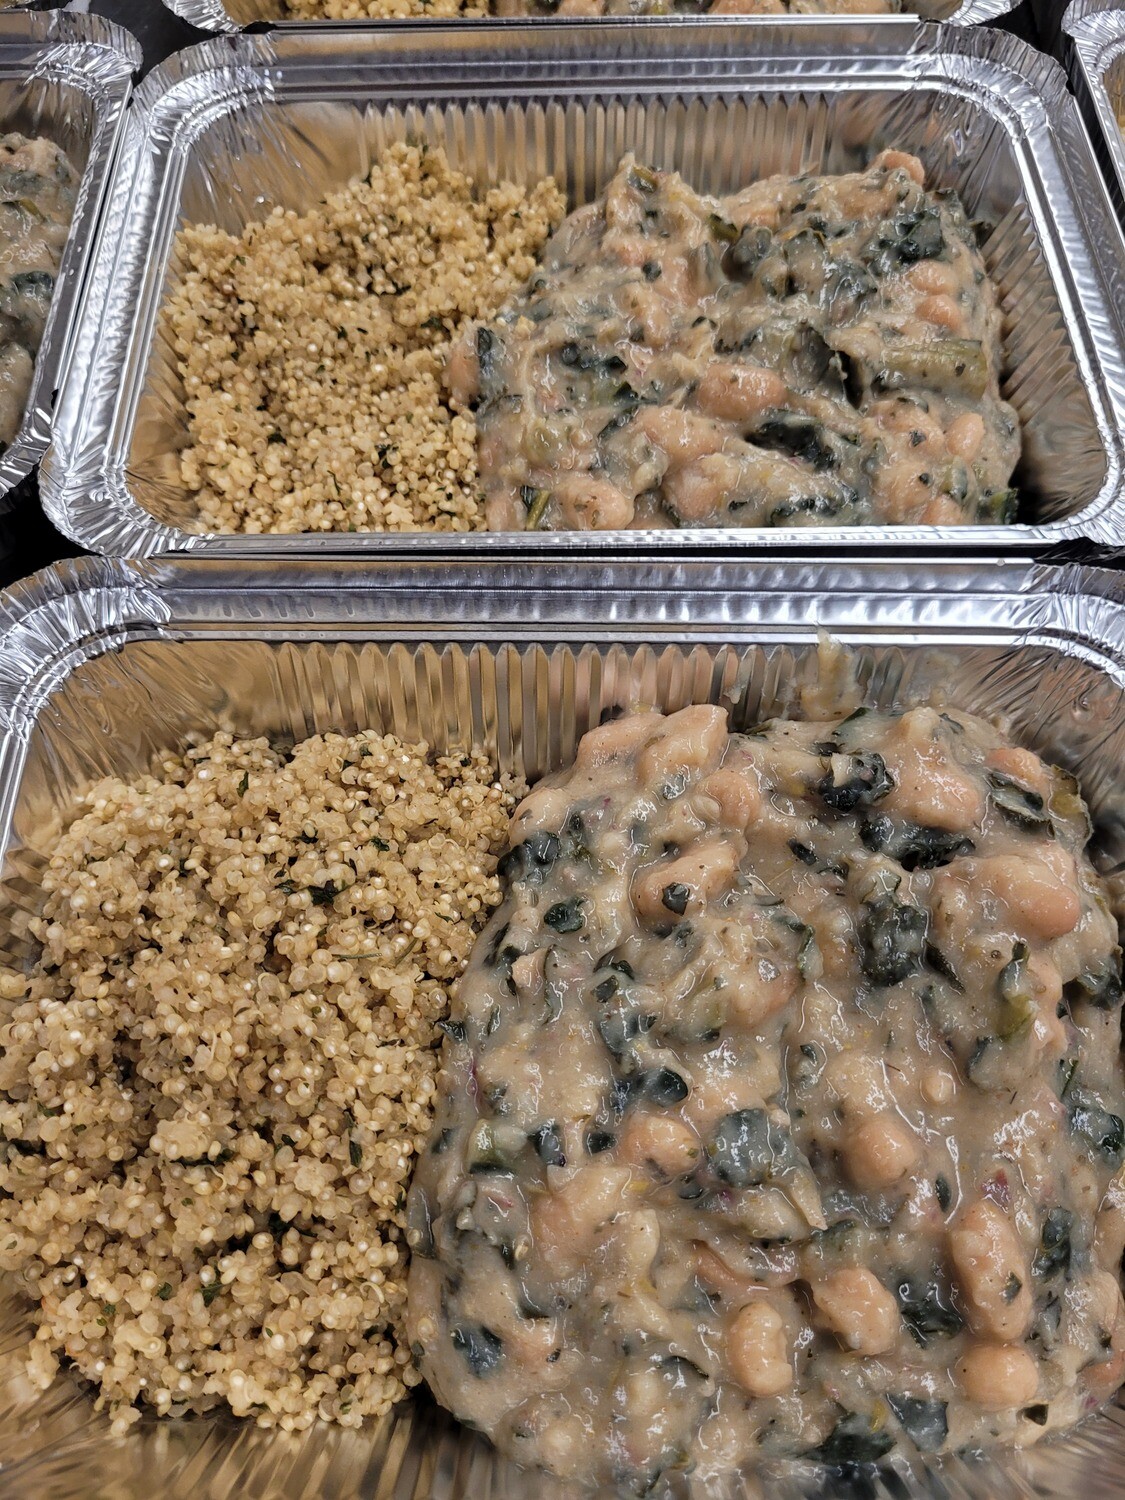 Vegan White Bean & Kale Stew with Herbed Quinoa, pre-cooked, 2 servings